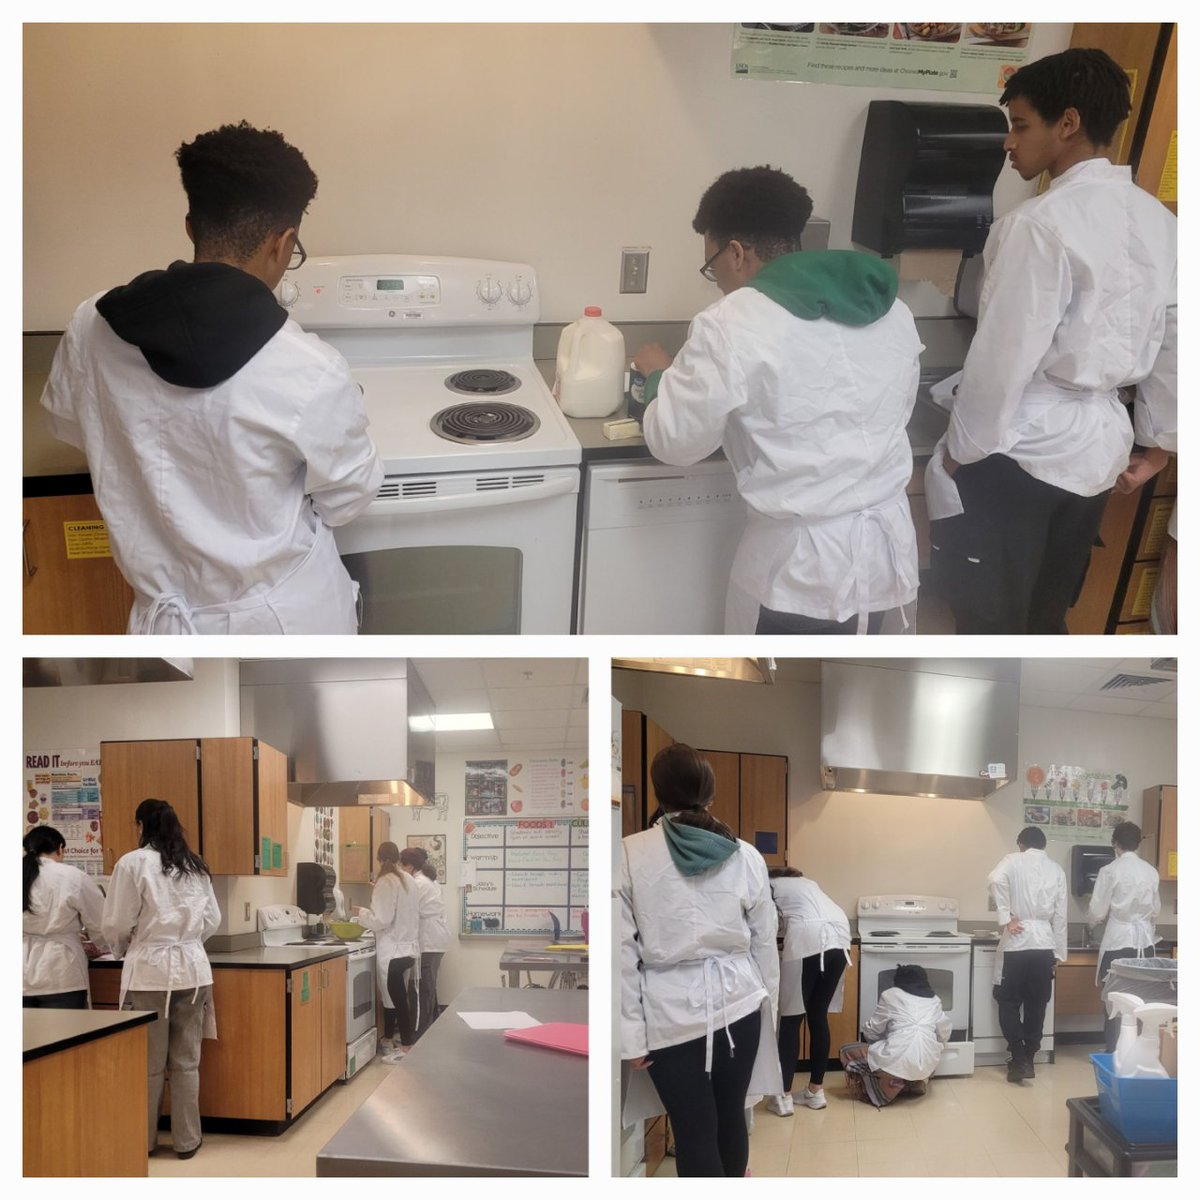 Students in Ms. Carnathan's culinary course collaborate to prepare dough for cinnamon rolls! Each teammate serves a key contributor within this process.  @aghoulihan @ucpsnc